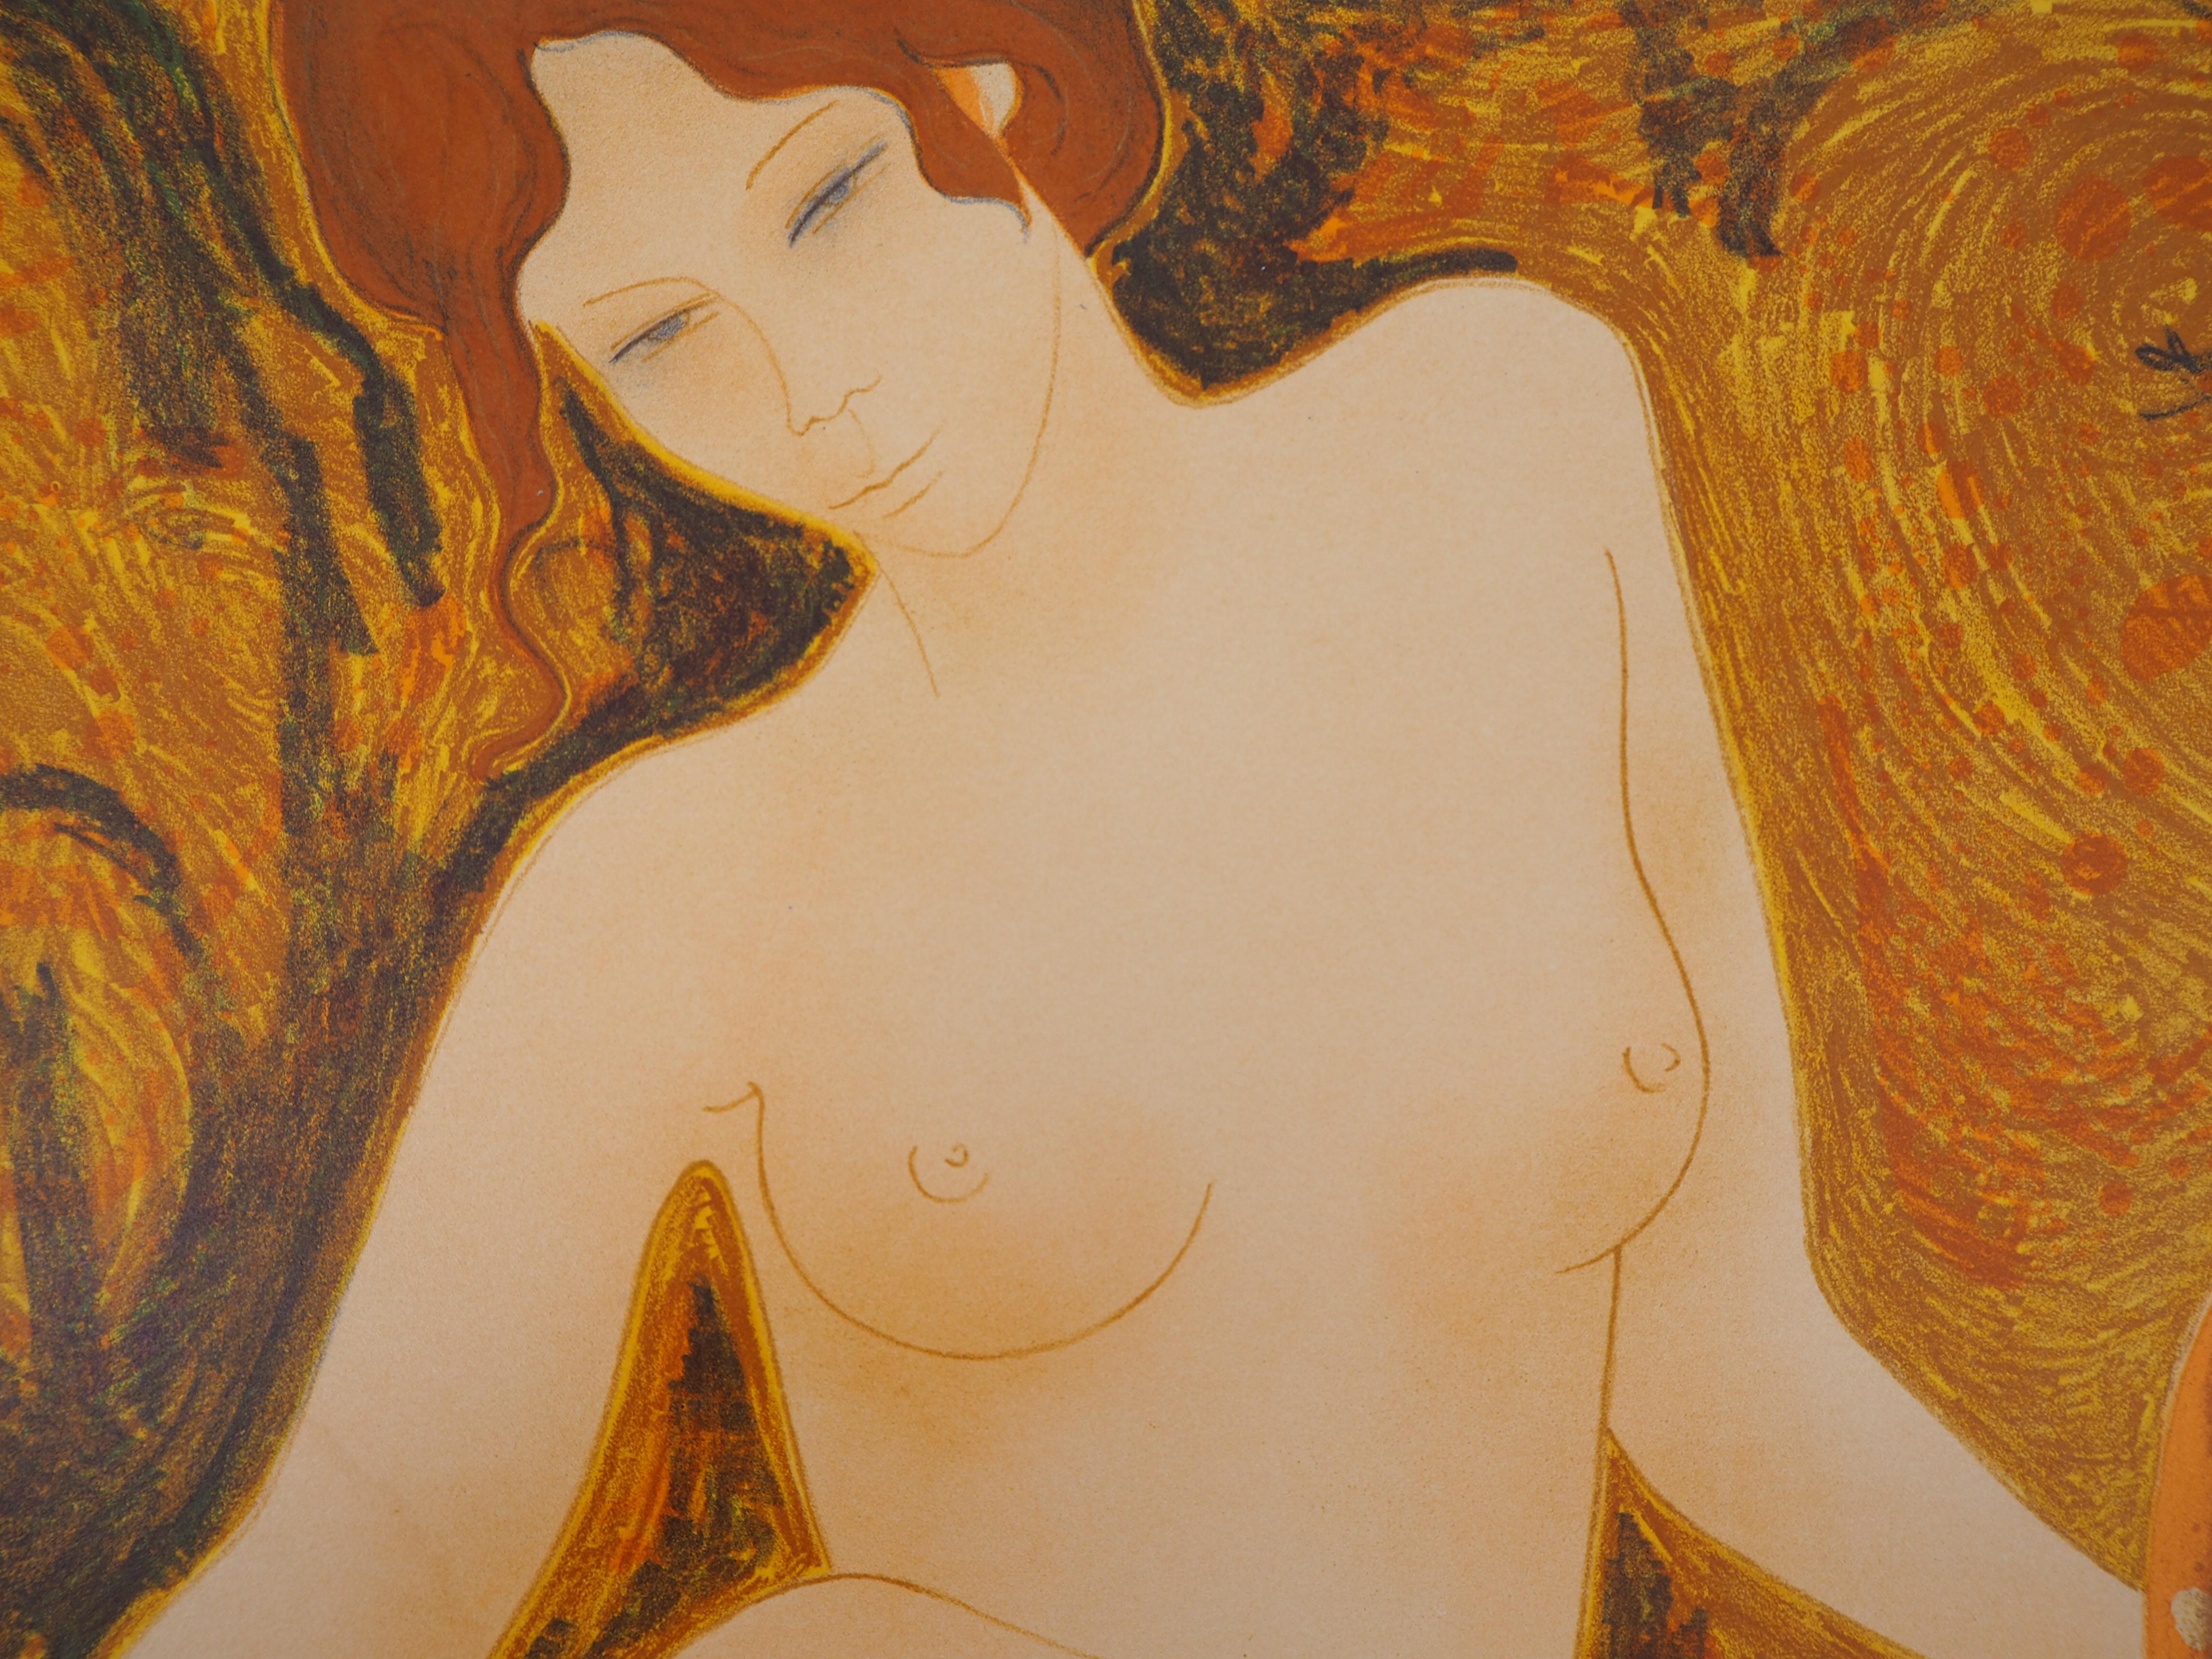 Relaxing Nudes - Original lithograph, Handsigned and Numbered /100 - Modern Print by Alain Bonnefoit